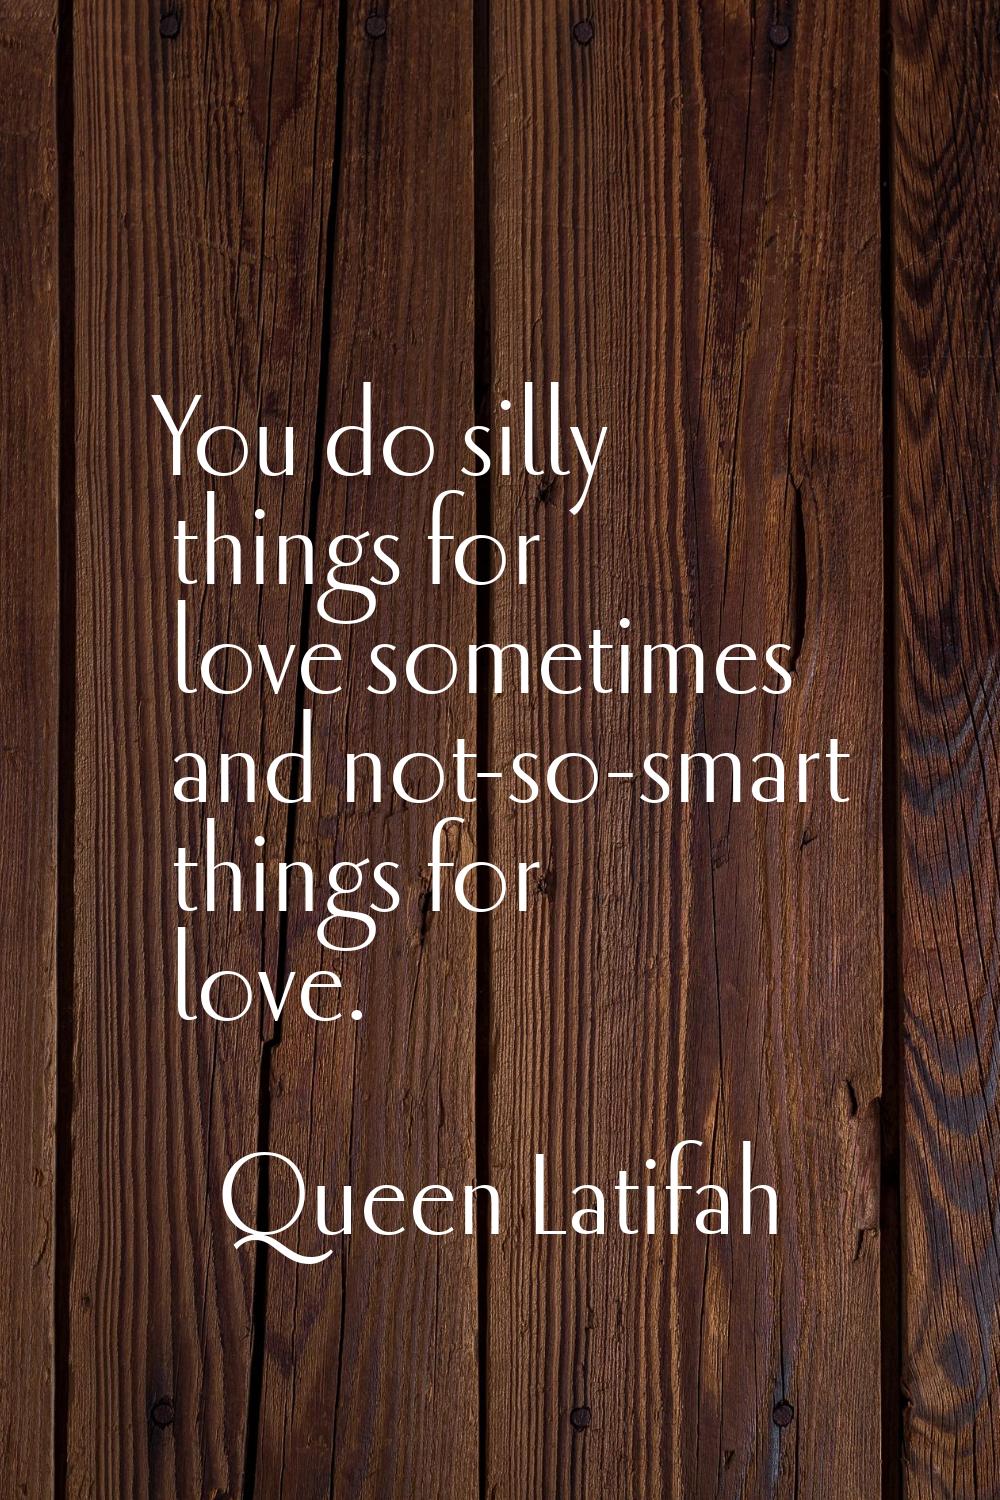 You do silly things for love sometimes and not-so-smart things for love.